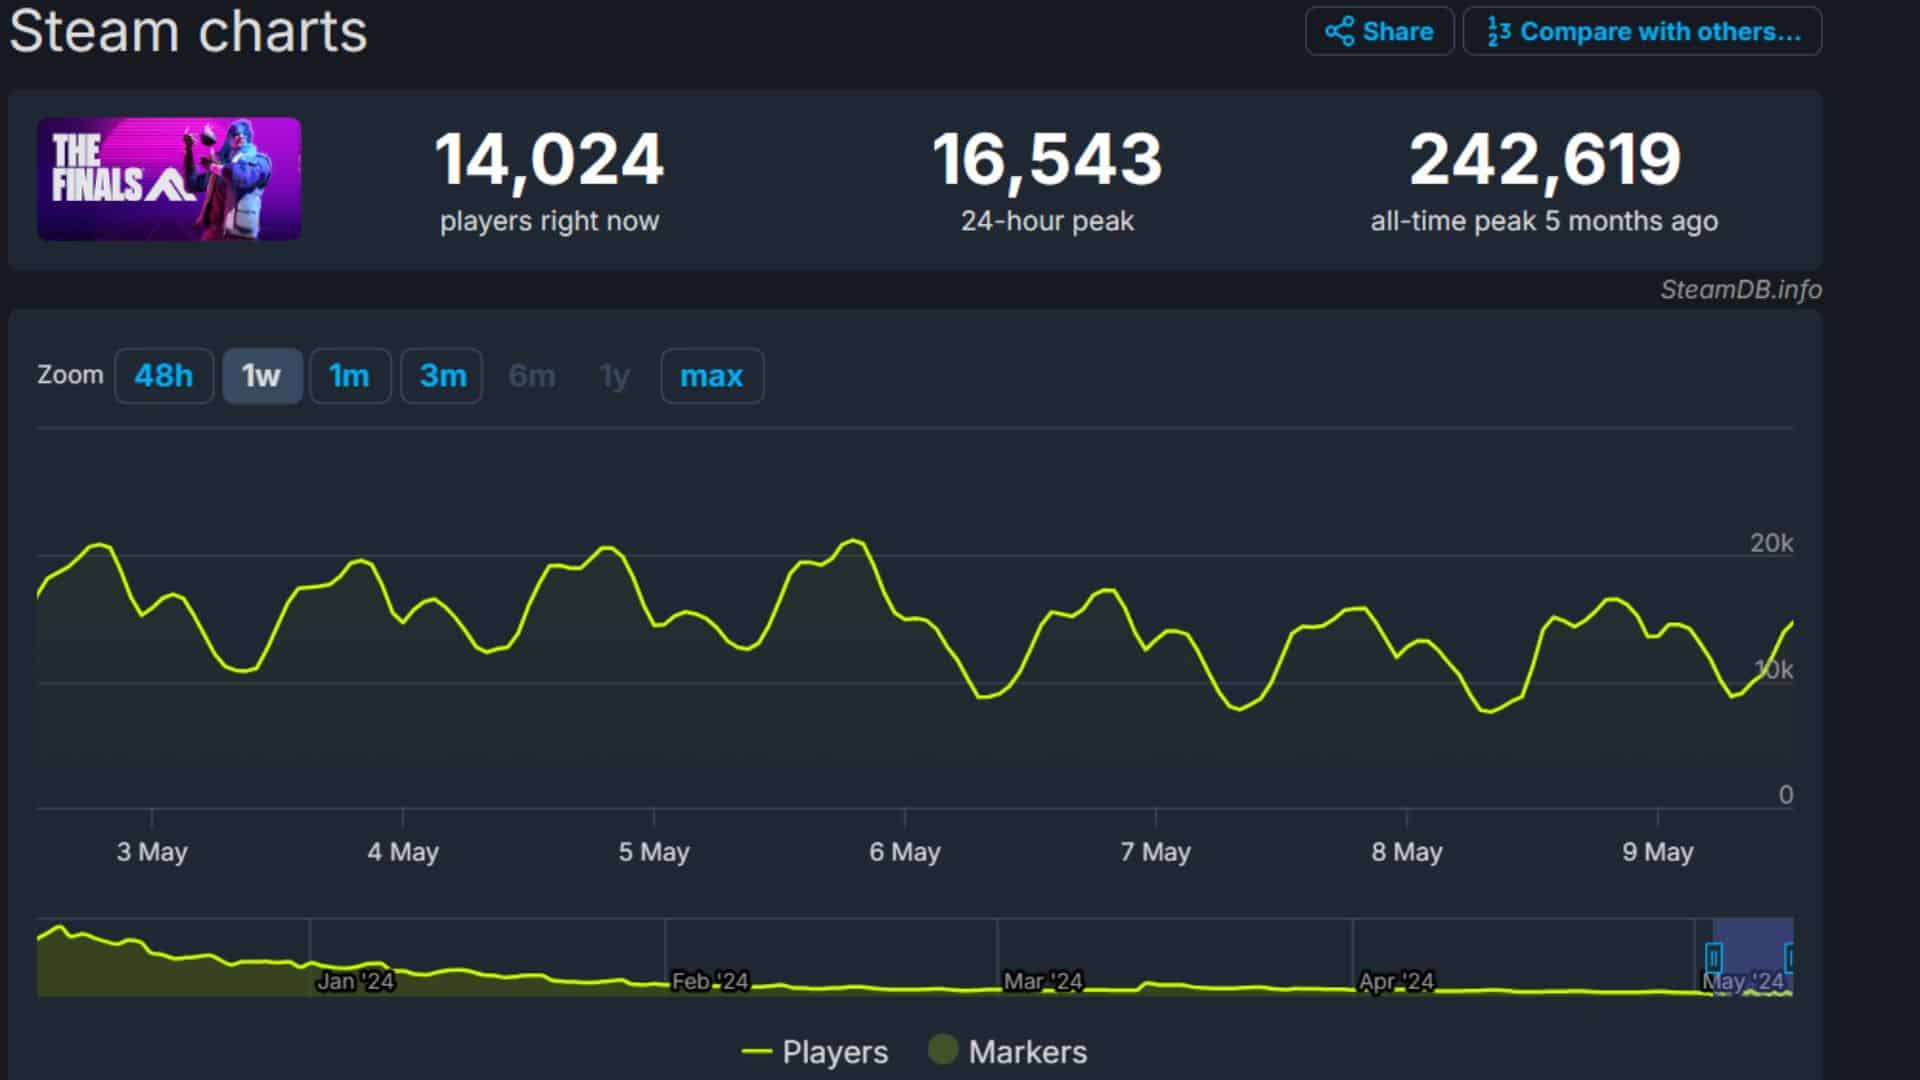 The Finals SteamDB player count